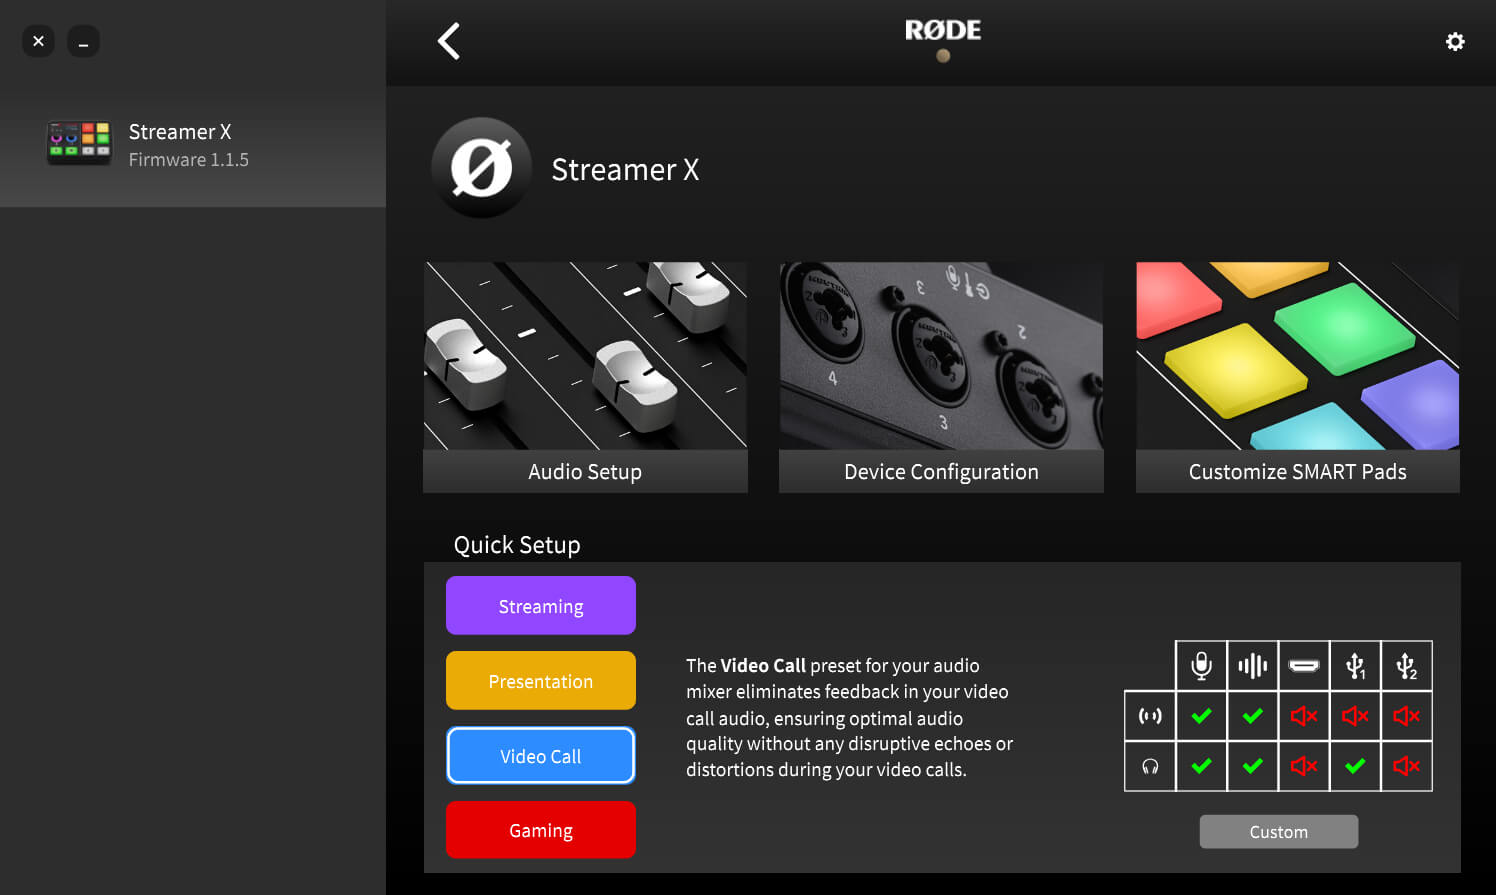 RØDE Central interface with Streamer X connected